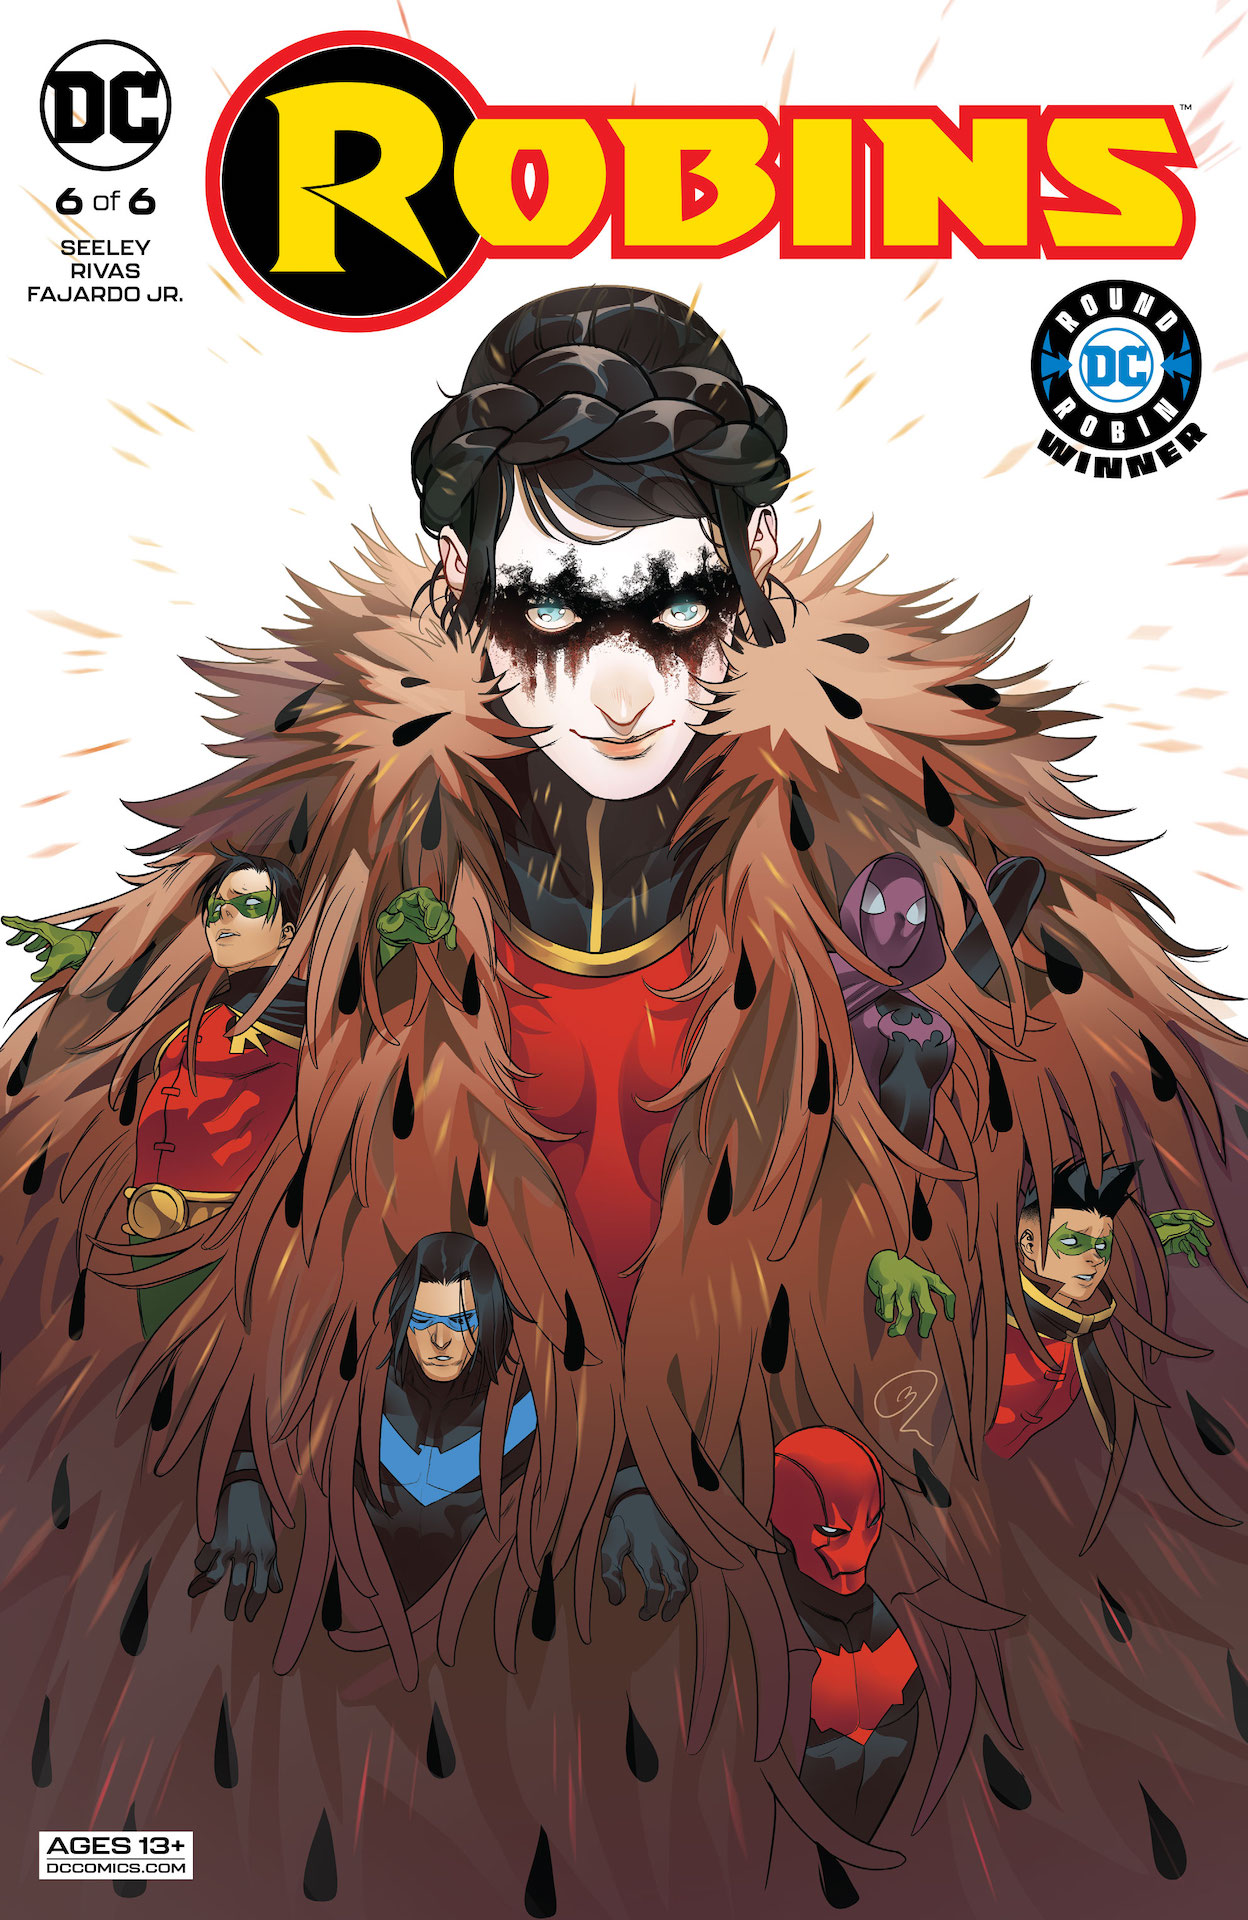 DC Preview: Robins #6